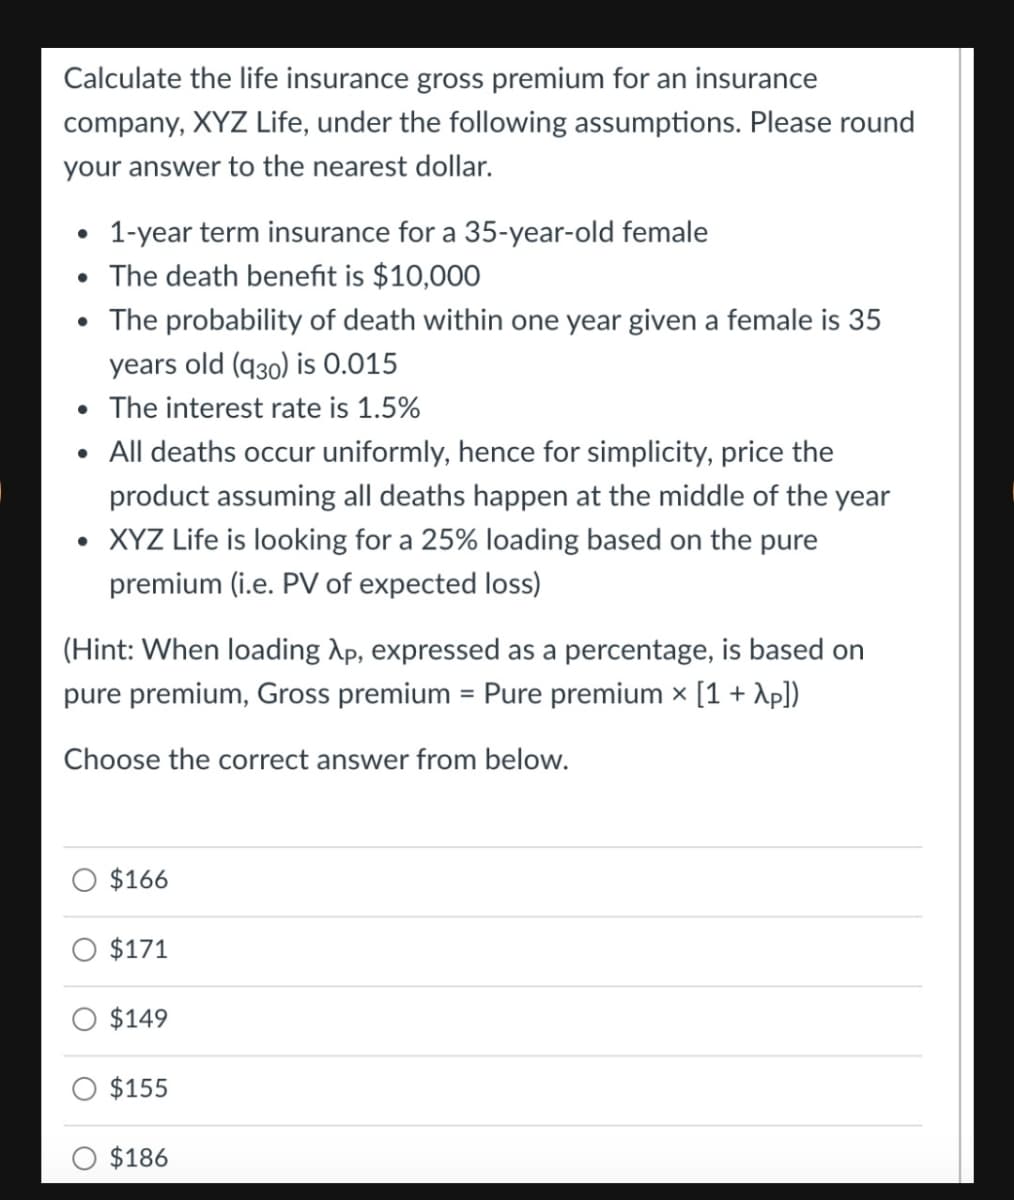 Calculate the life insurance gross premium for an insurance
company, XYZ Life, under the following assumptions. Please round
your answer to the nearest dollar.
1-year term insurance for a 35-year-old female
• The death benefit is $10,00O
• The probability of death within one year given a female is 35
years old (q30) is 0.015
The interest rate is 1.5%
• All deaths occur uniformly, hence for simplicity, price the
product assuming all deaths happen at the middle of the year
• XYZ Life is looking for a 25% loading based on the pure
premium (i.e. PV of expected loss)
(Hint: When loading Ap, expressed as a percentage, is based on
pure premium, Gross premium = Pure premium × [1 + Ap])
Choose the correct answer from below.
$166
$171
$149
$155
O $186
